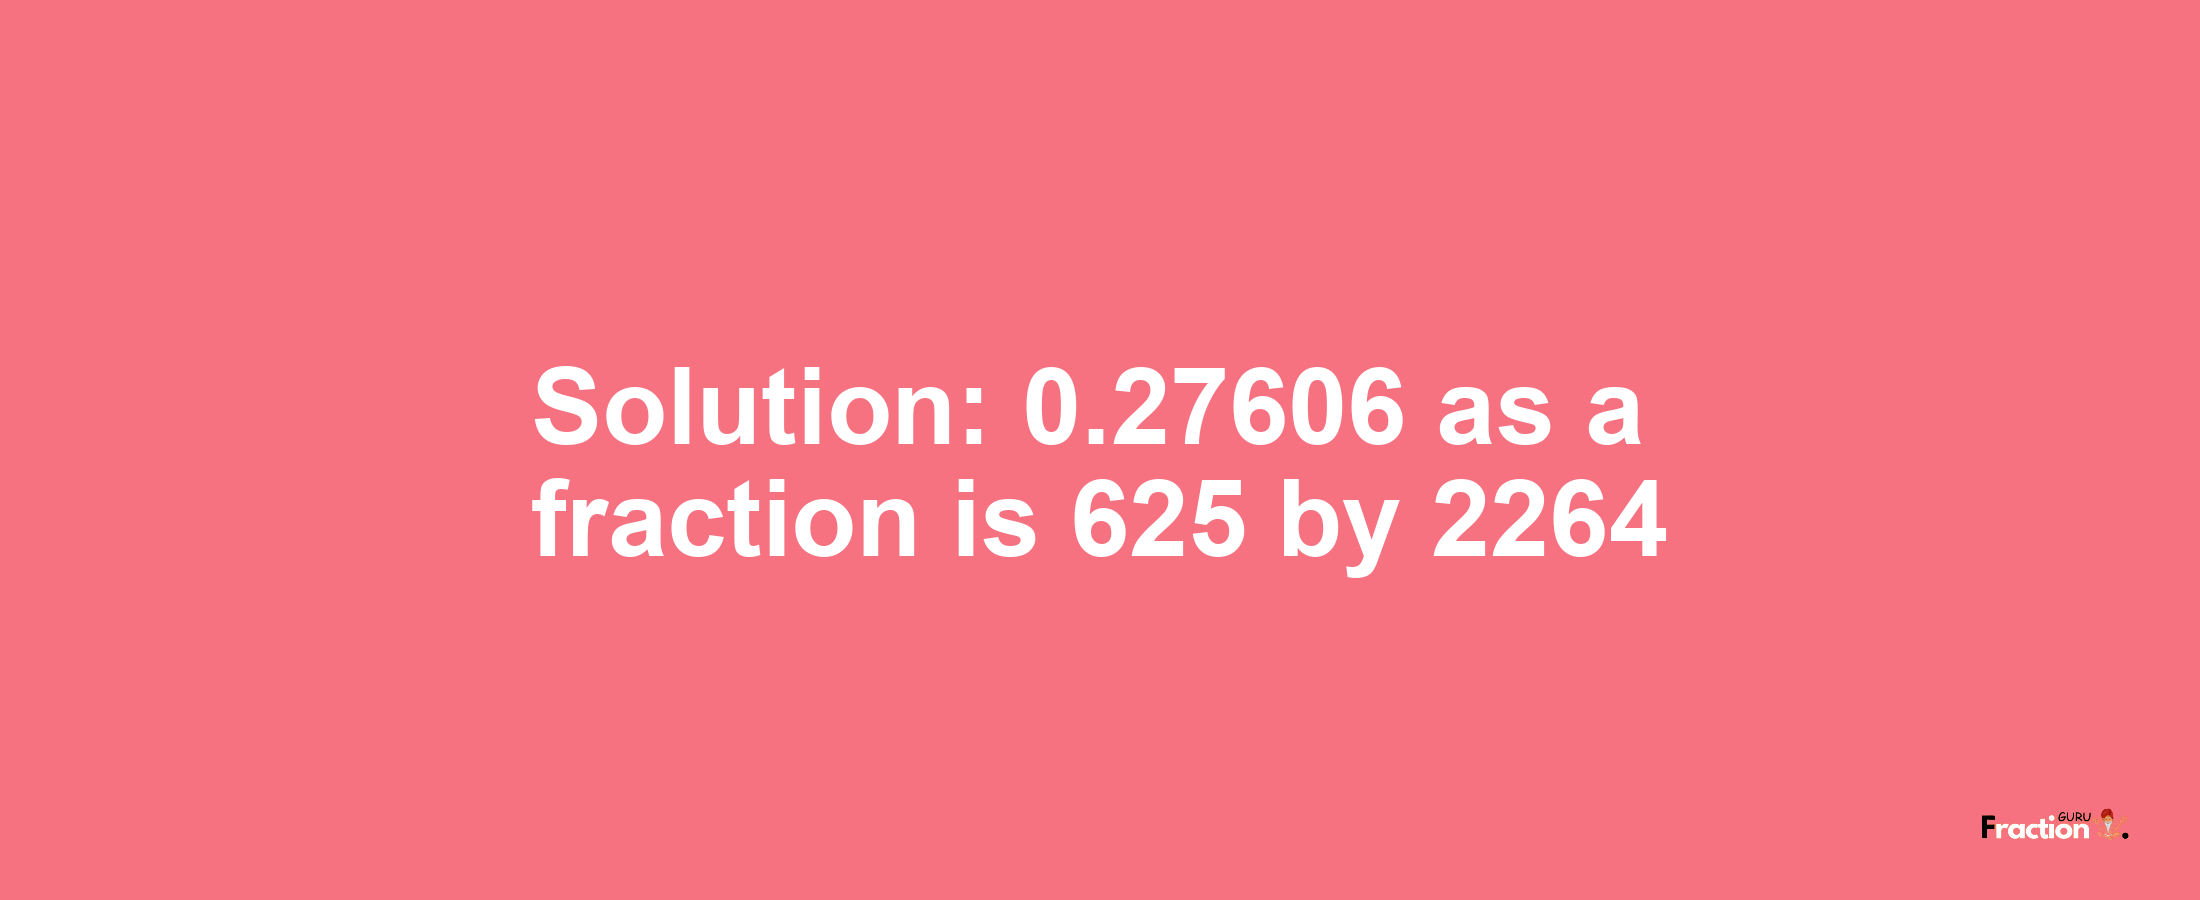 Solution:0.27606 as a fraction is 625/2264